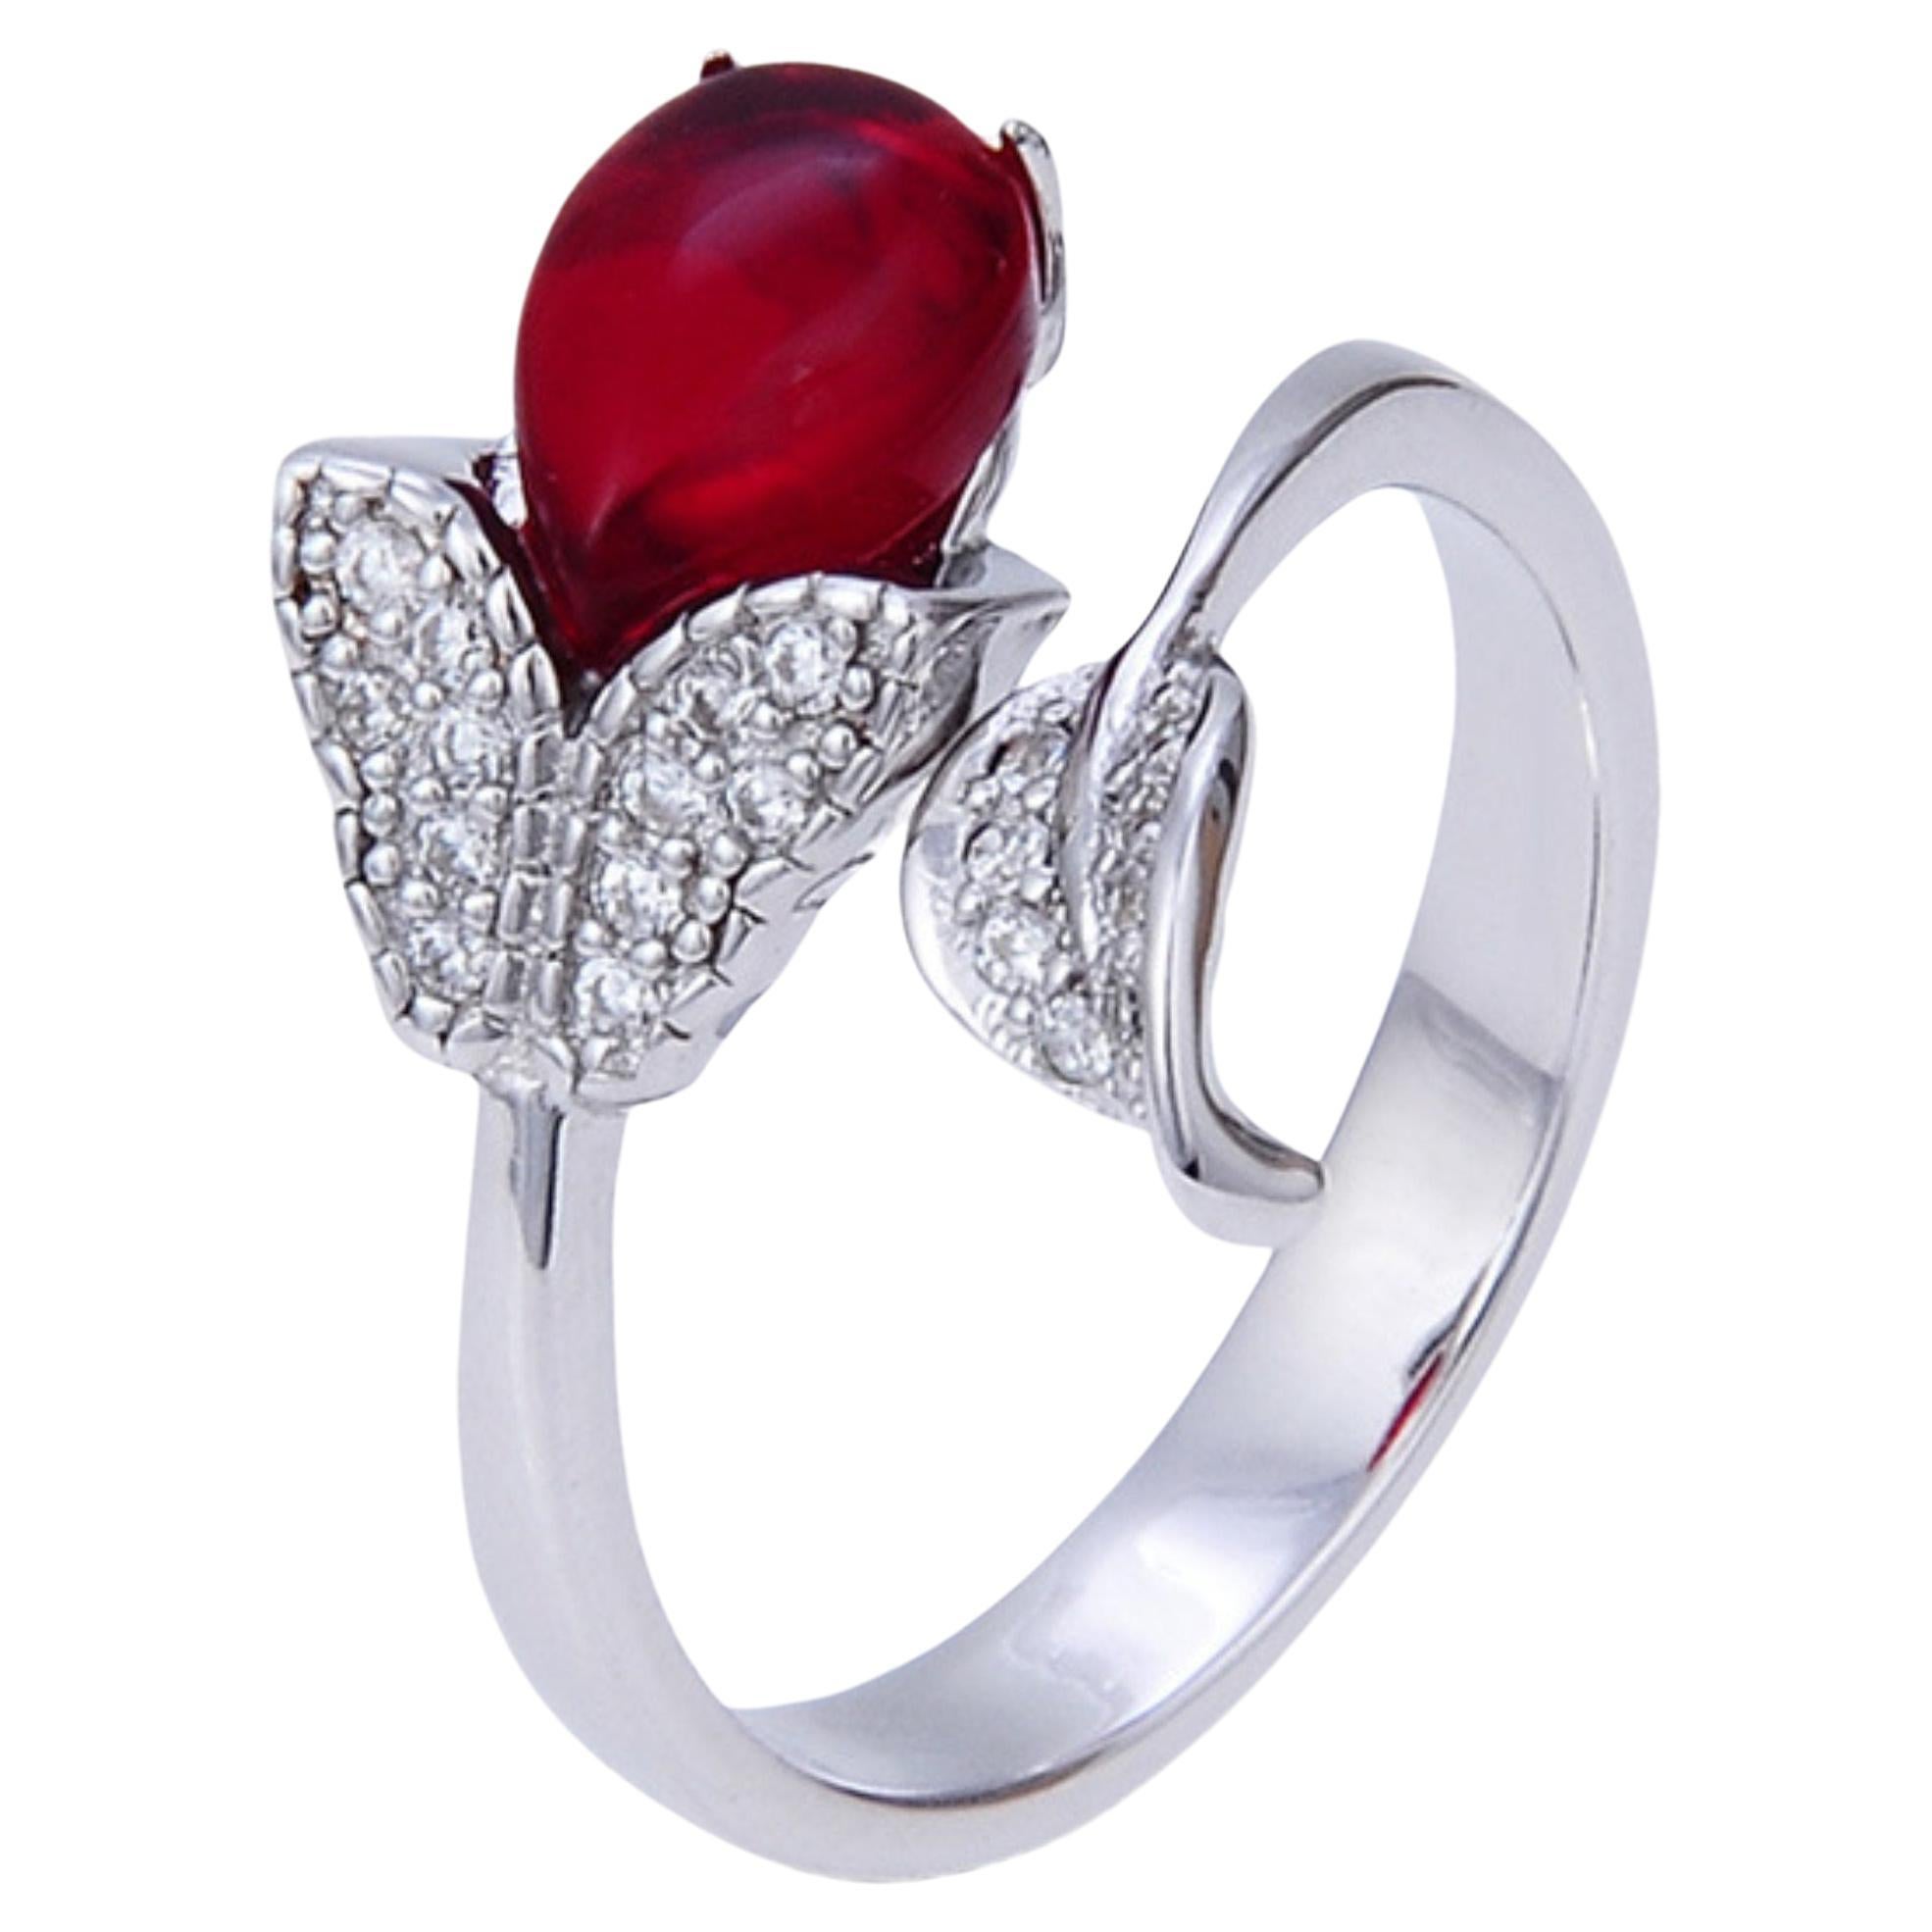 For Sale:  Art Deco Style 2 CT Floral Red Ruby Diamond Open Style Cocktail Ring or Fashion